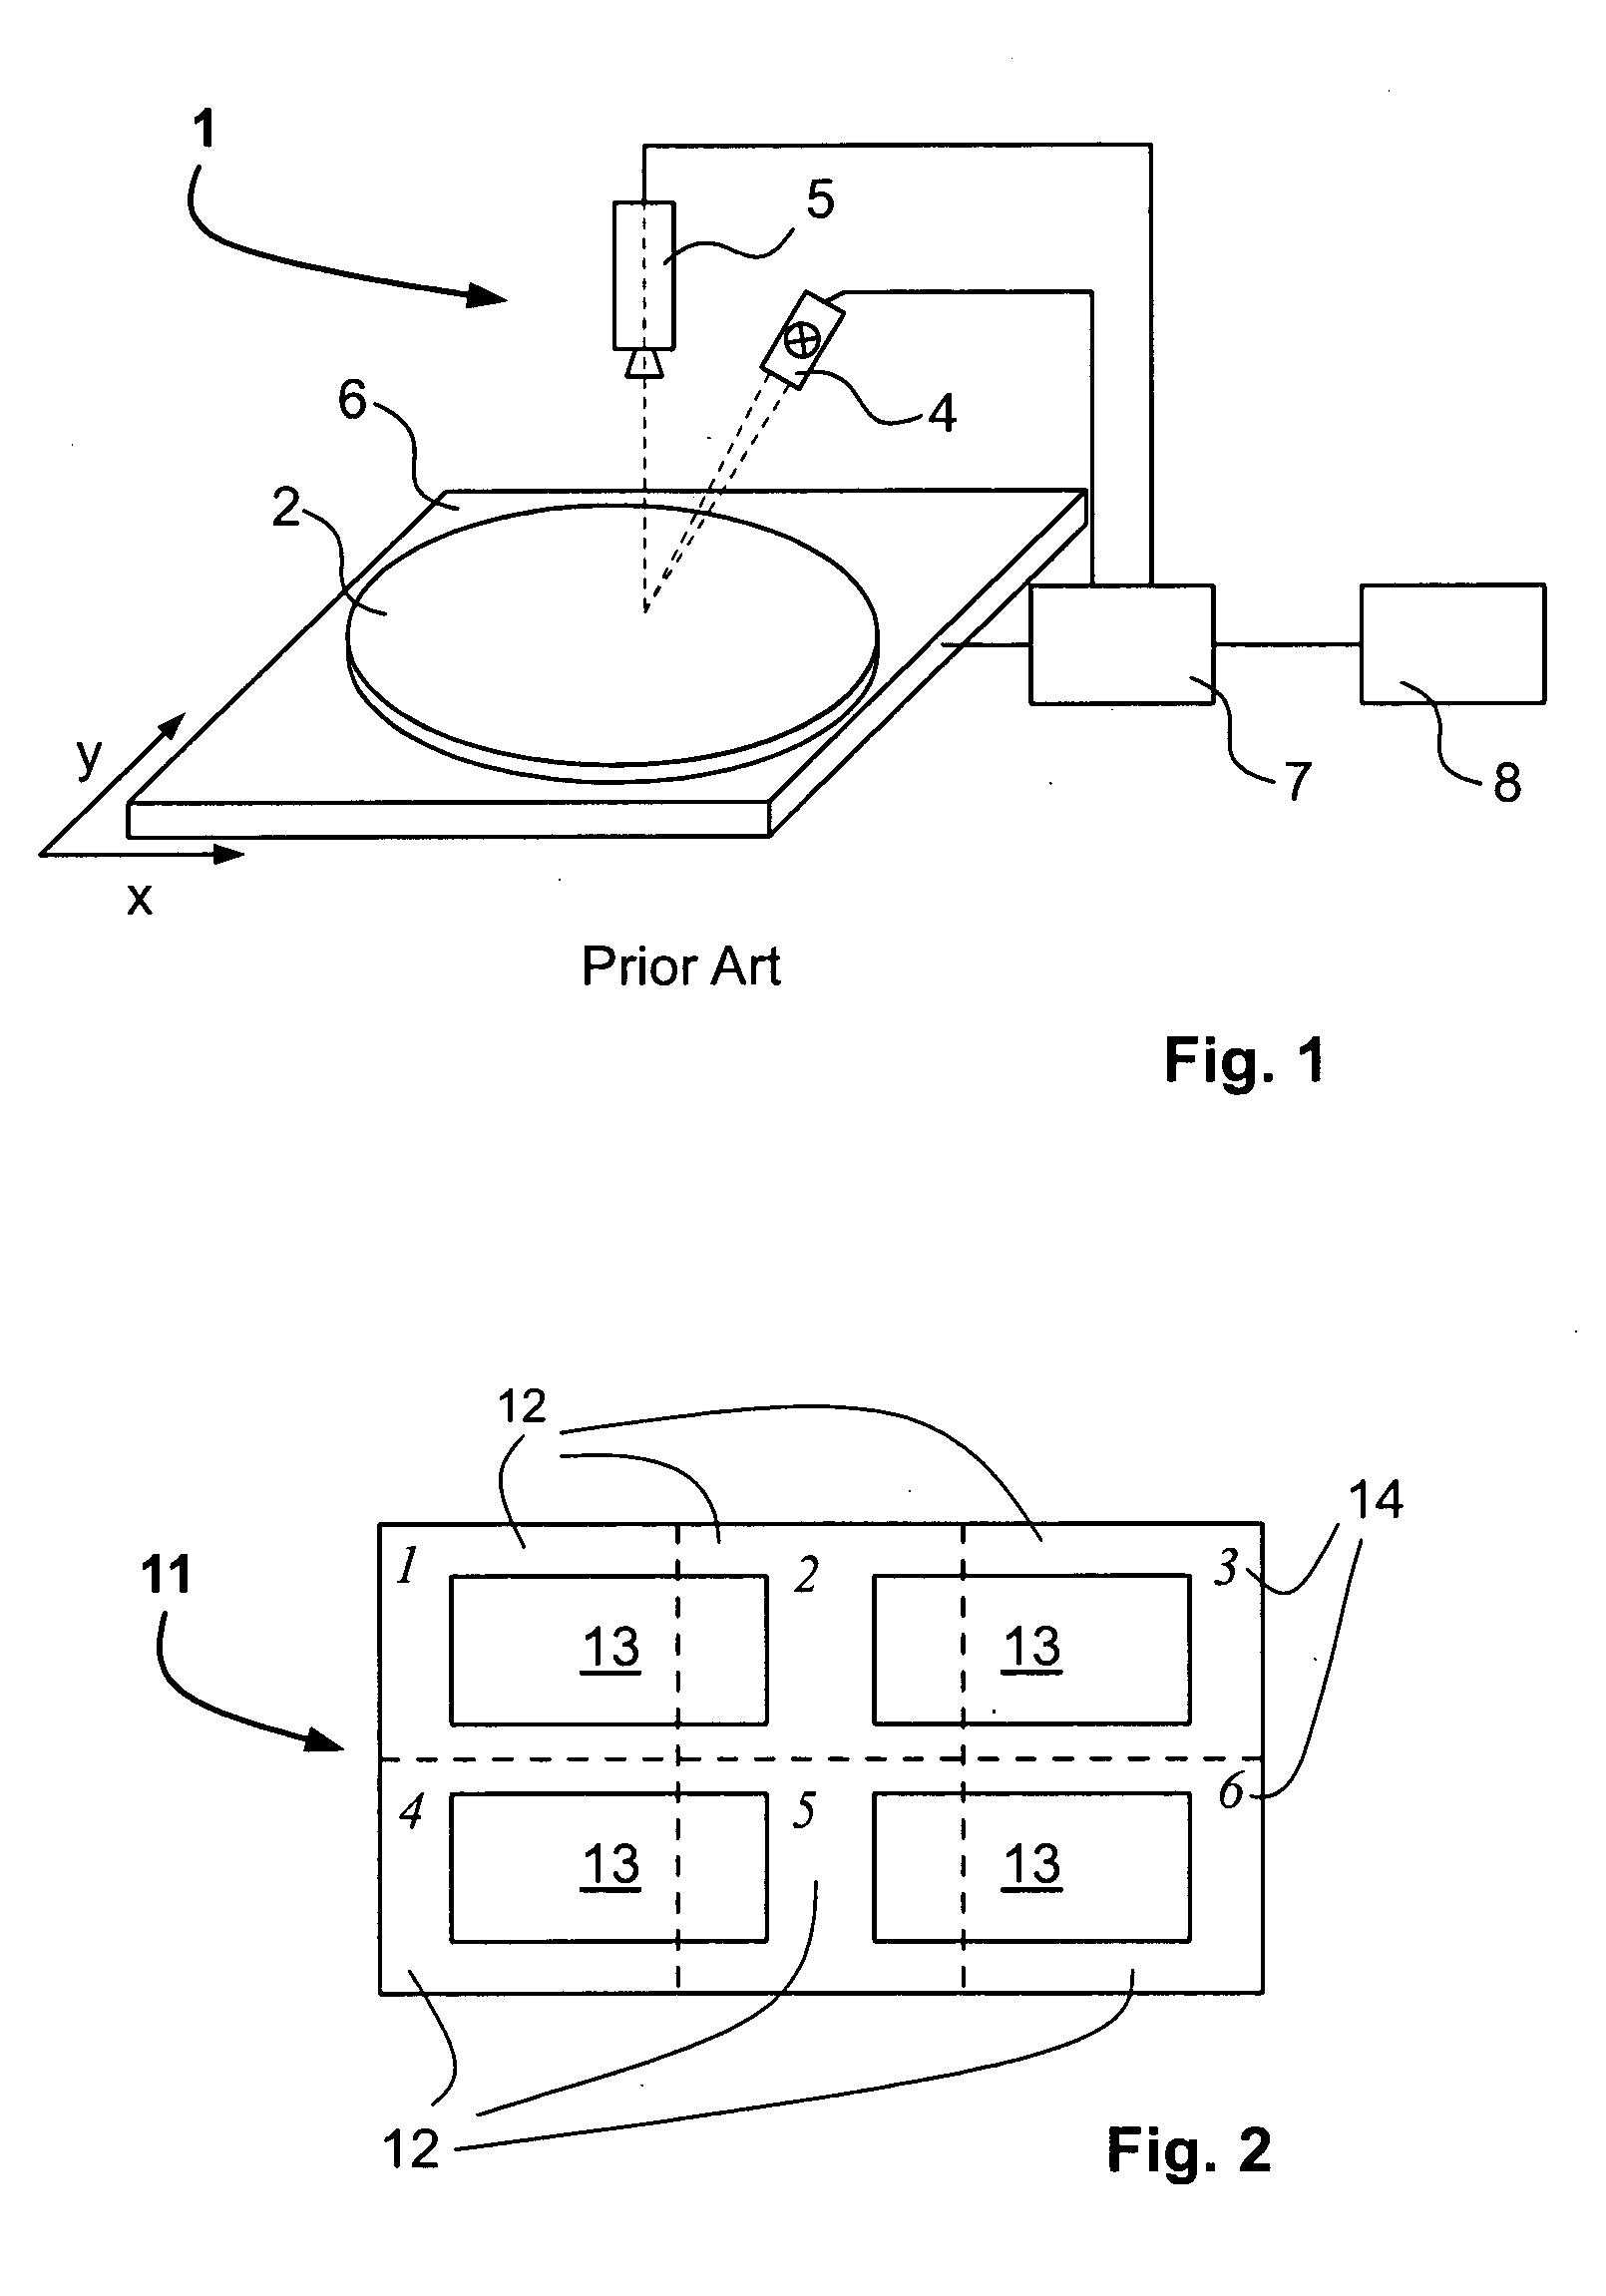 Method and apparatus for processing the image of the surface of a wafer recorded by at least one camera